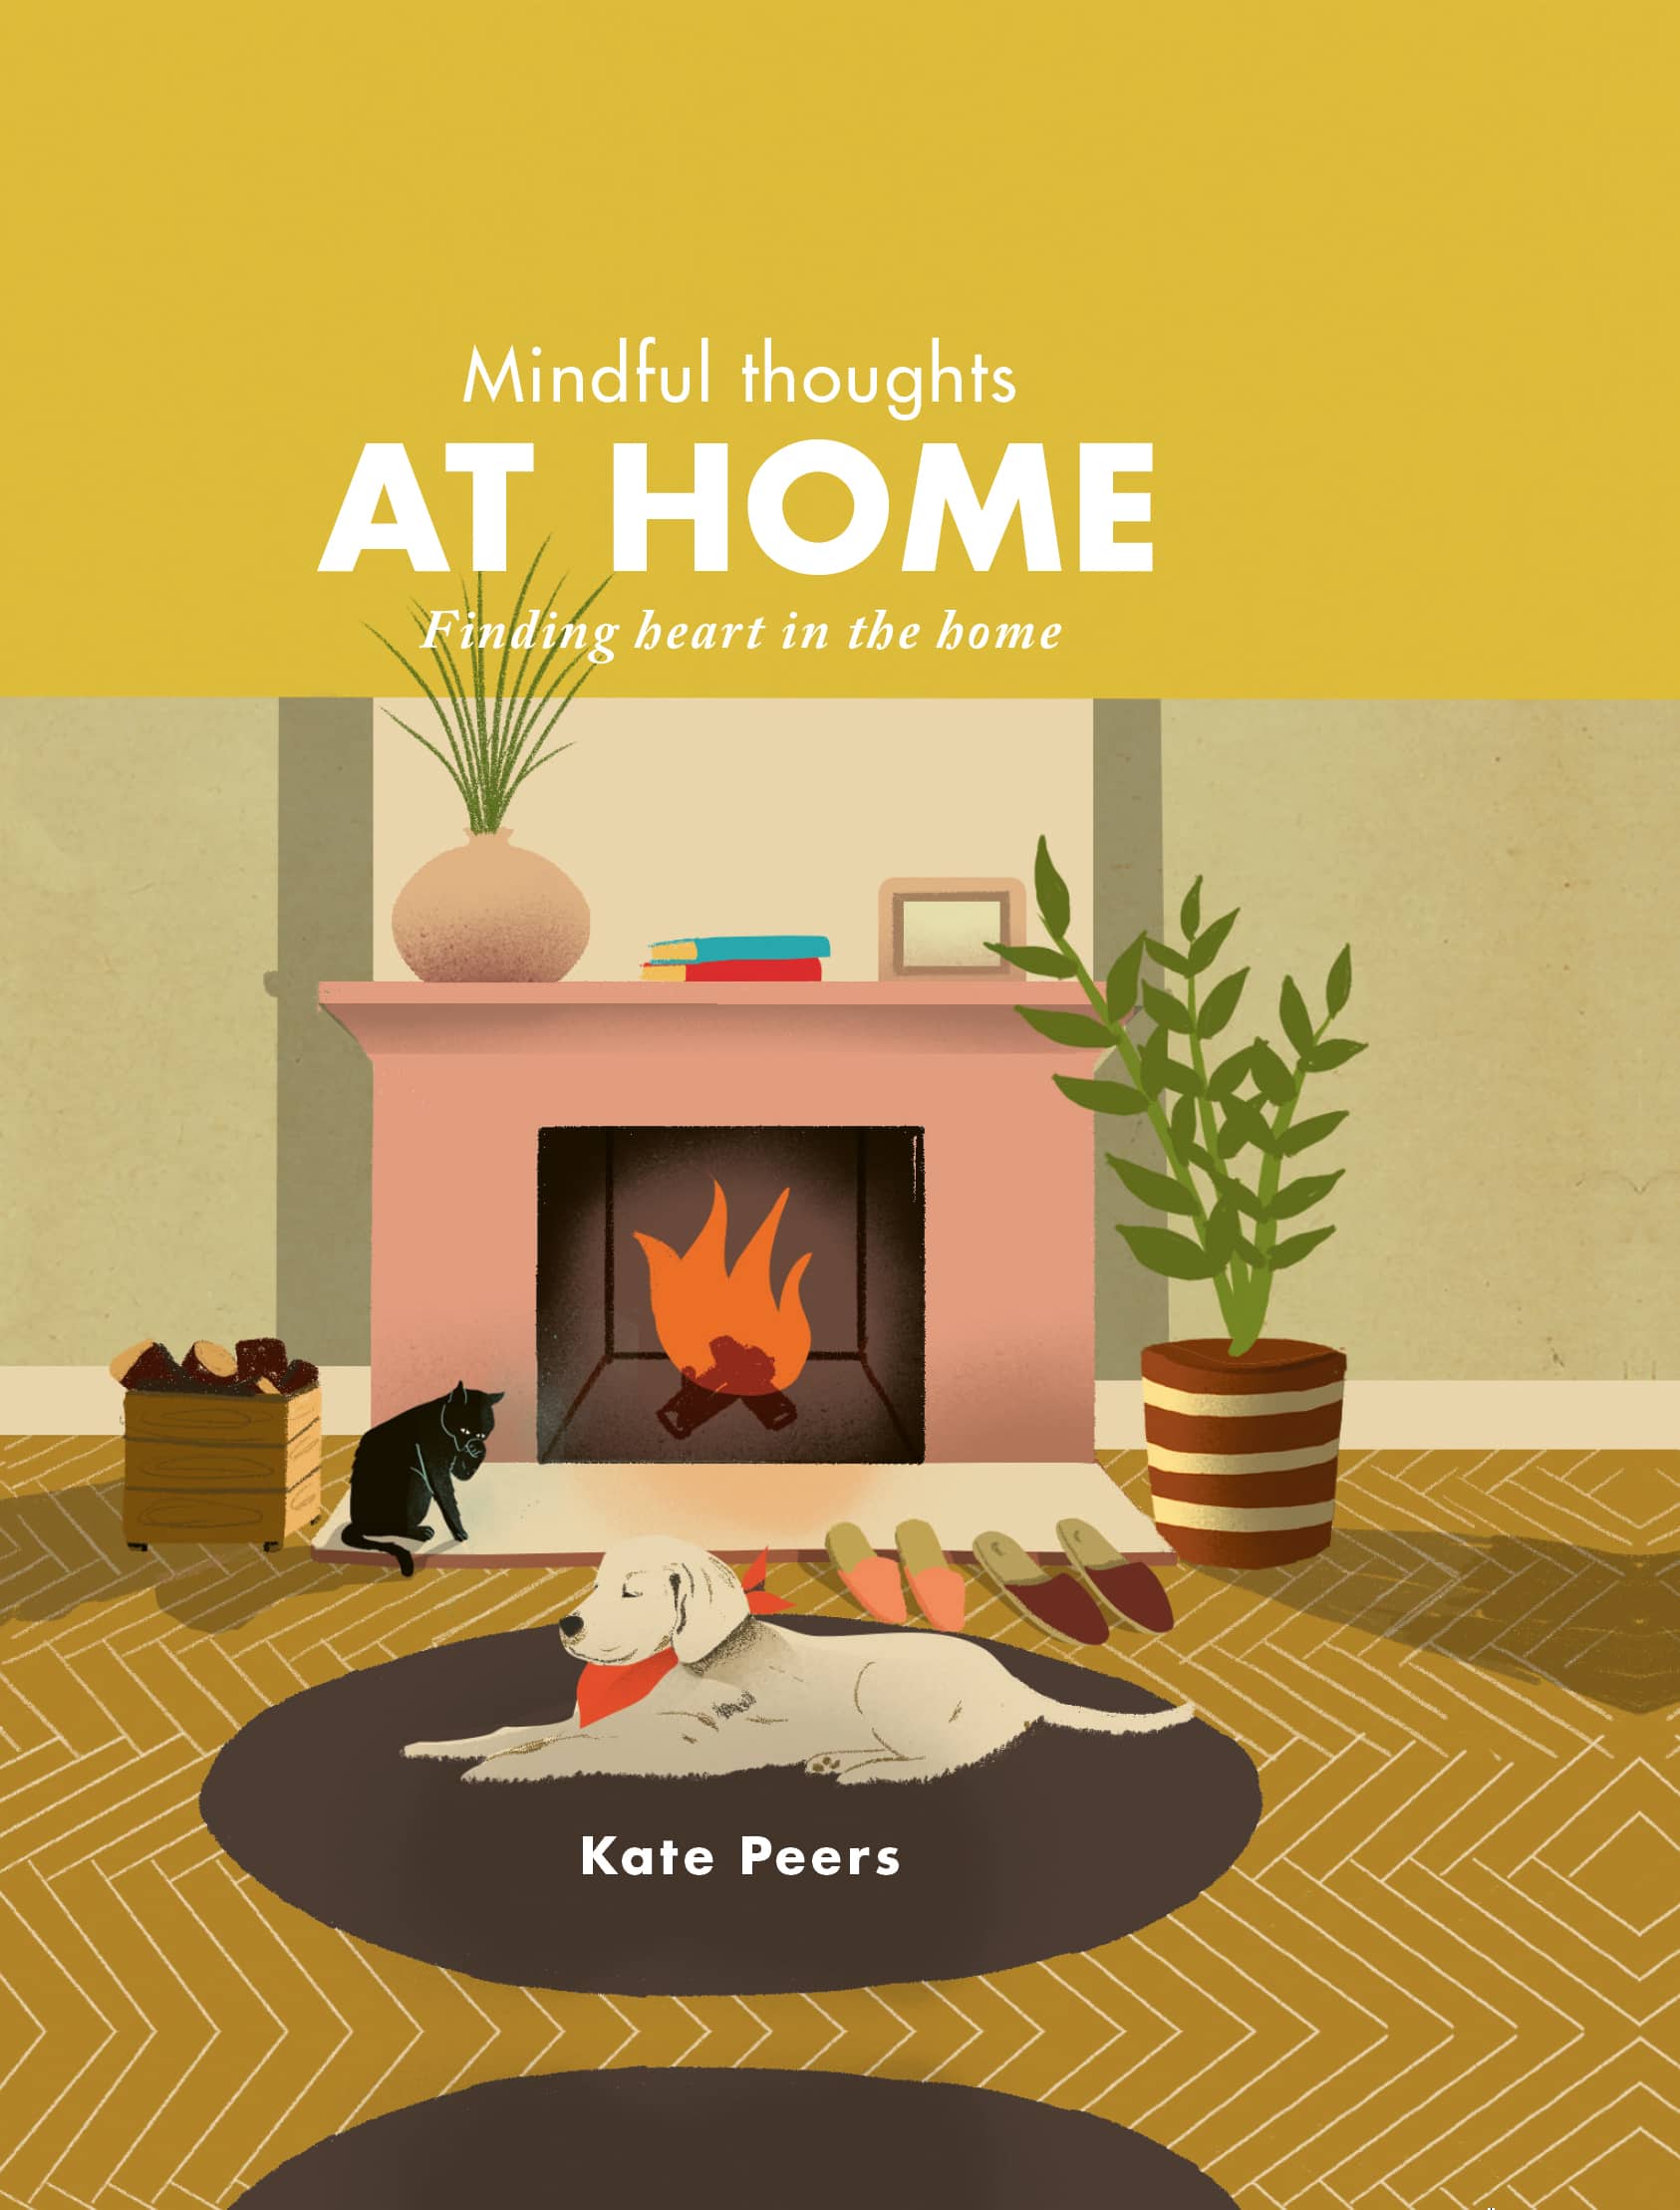 Mindful thoughts AT HOME Finding heart in the home Kate Peers - photo 1